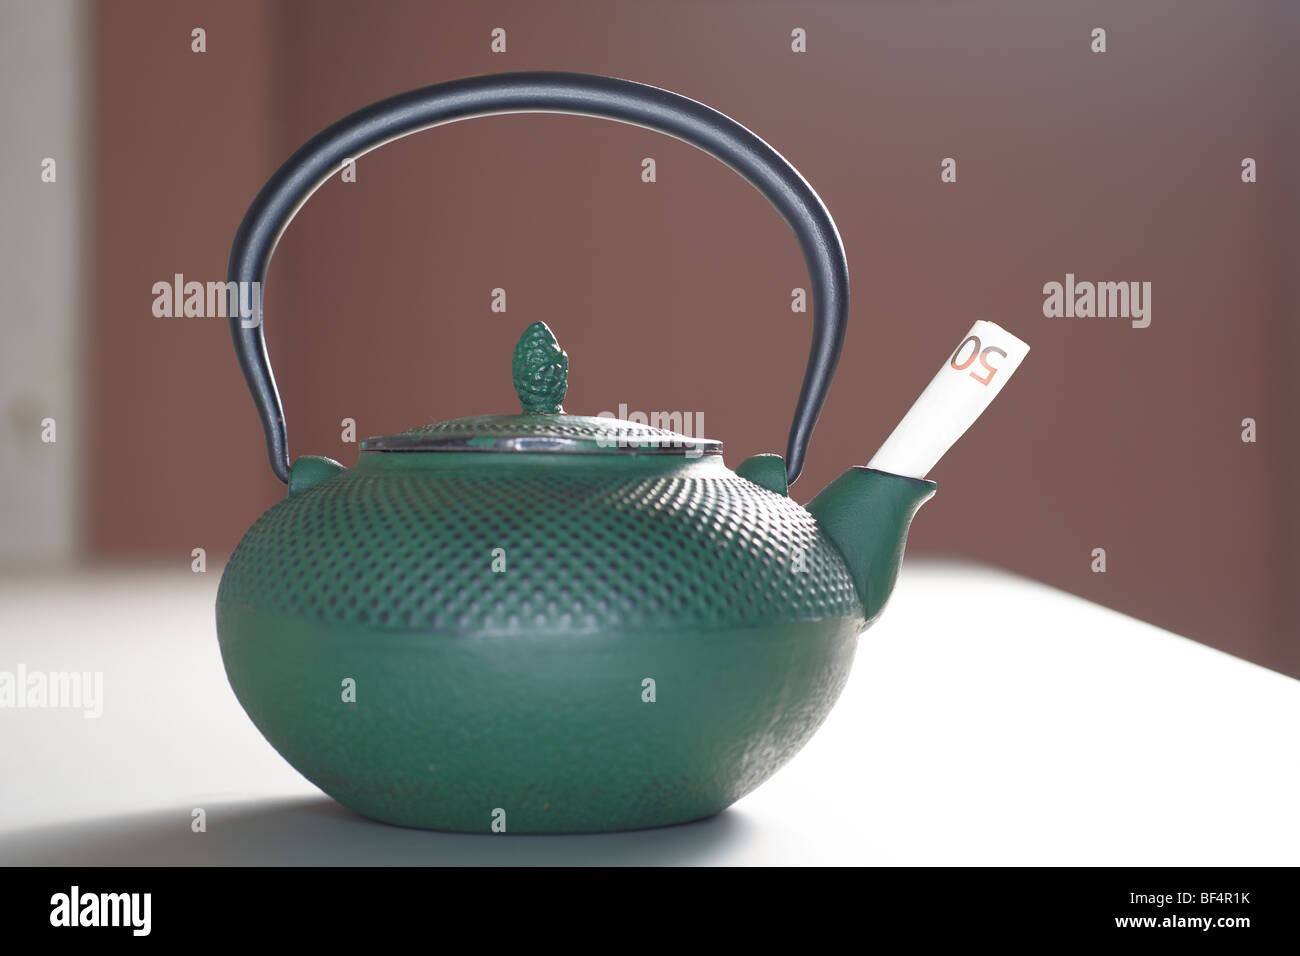 https://c8.alamy.com/comp/BF4R1K/cast-iron-teapot-with-a-banknote-in-the-pouring-spout-BF4R1K.jpg